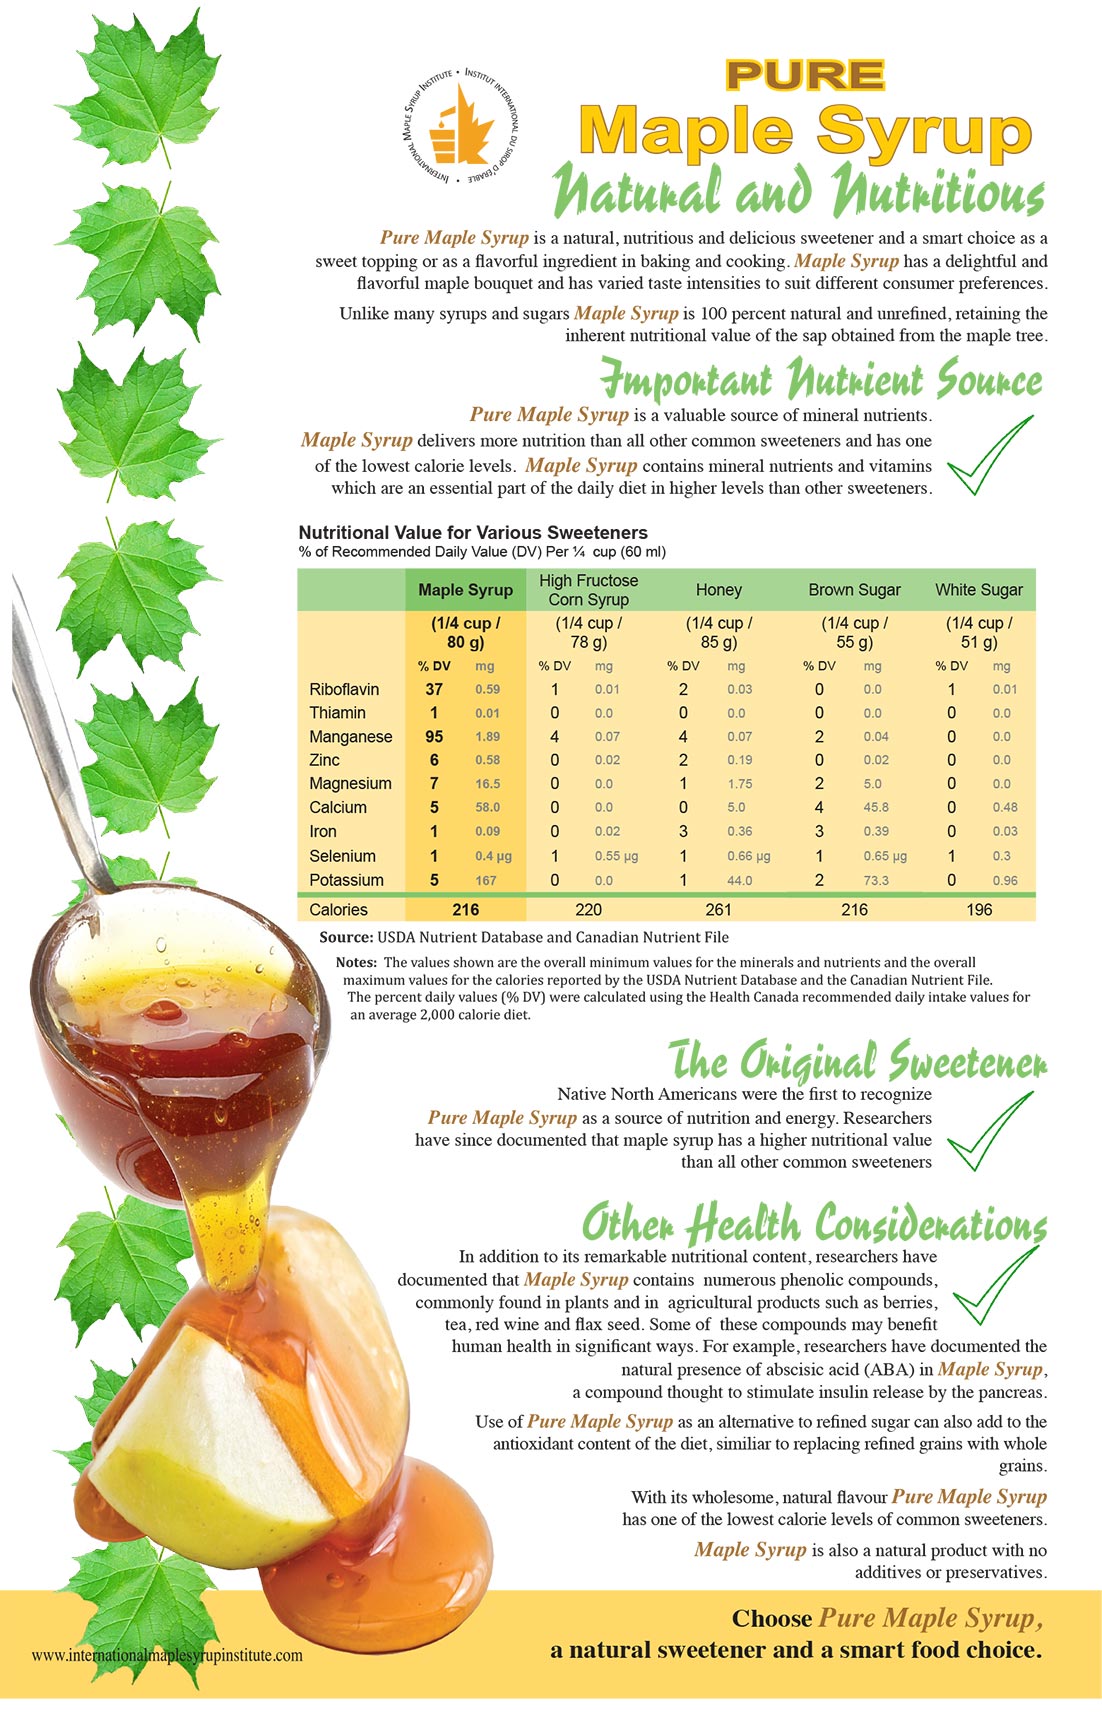 poster showing nutritional benefits of maple syrup